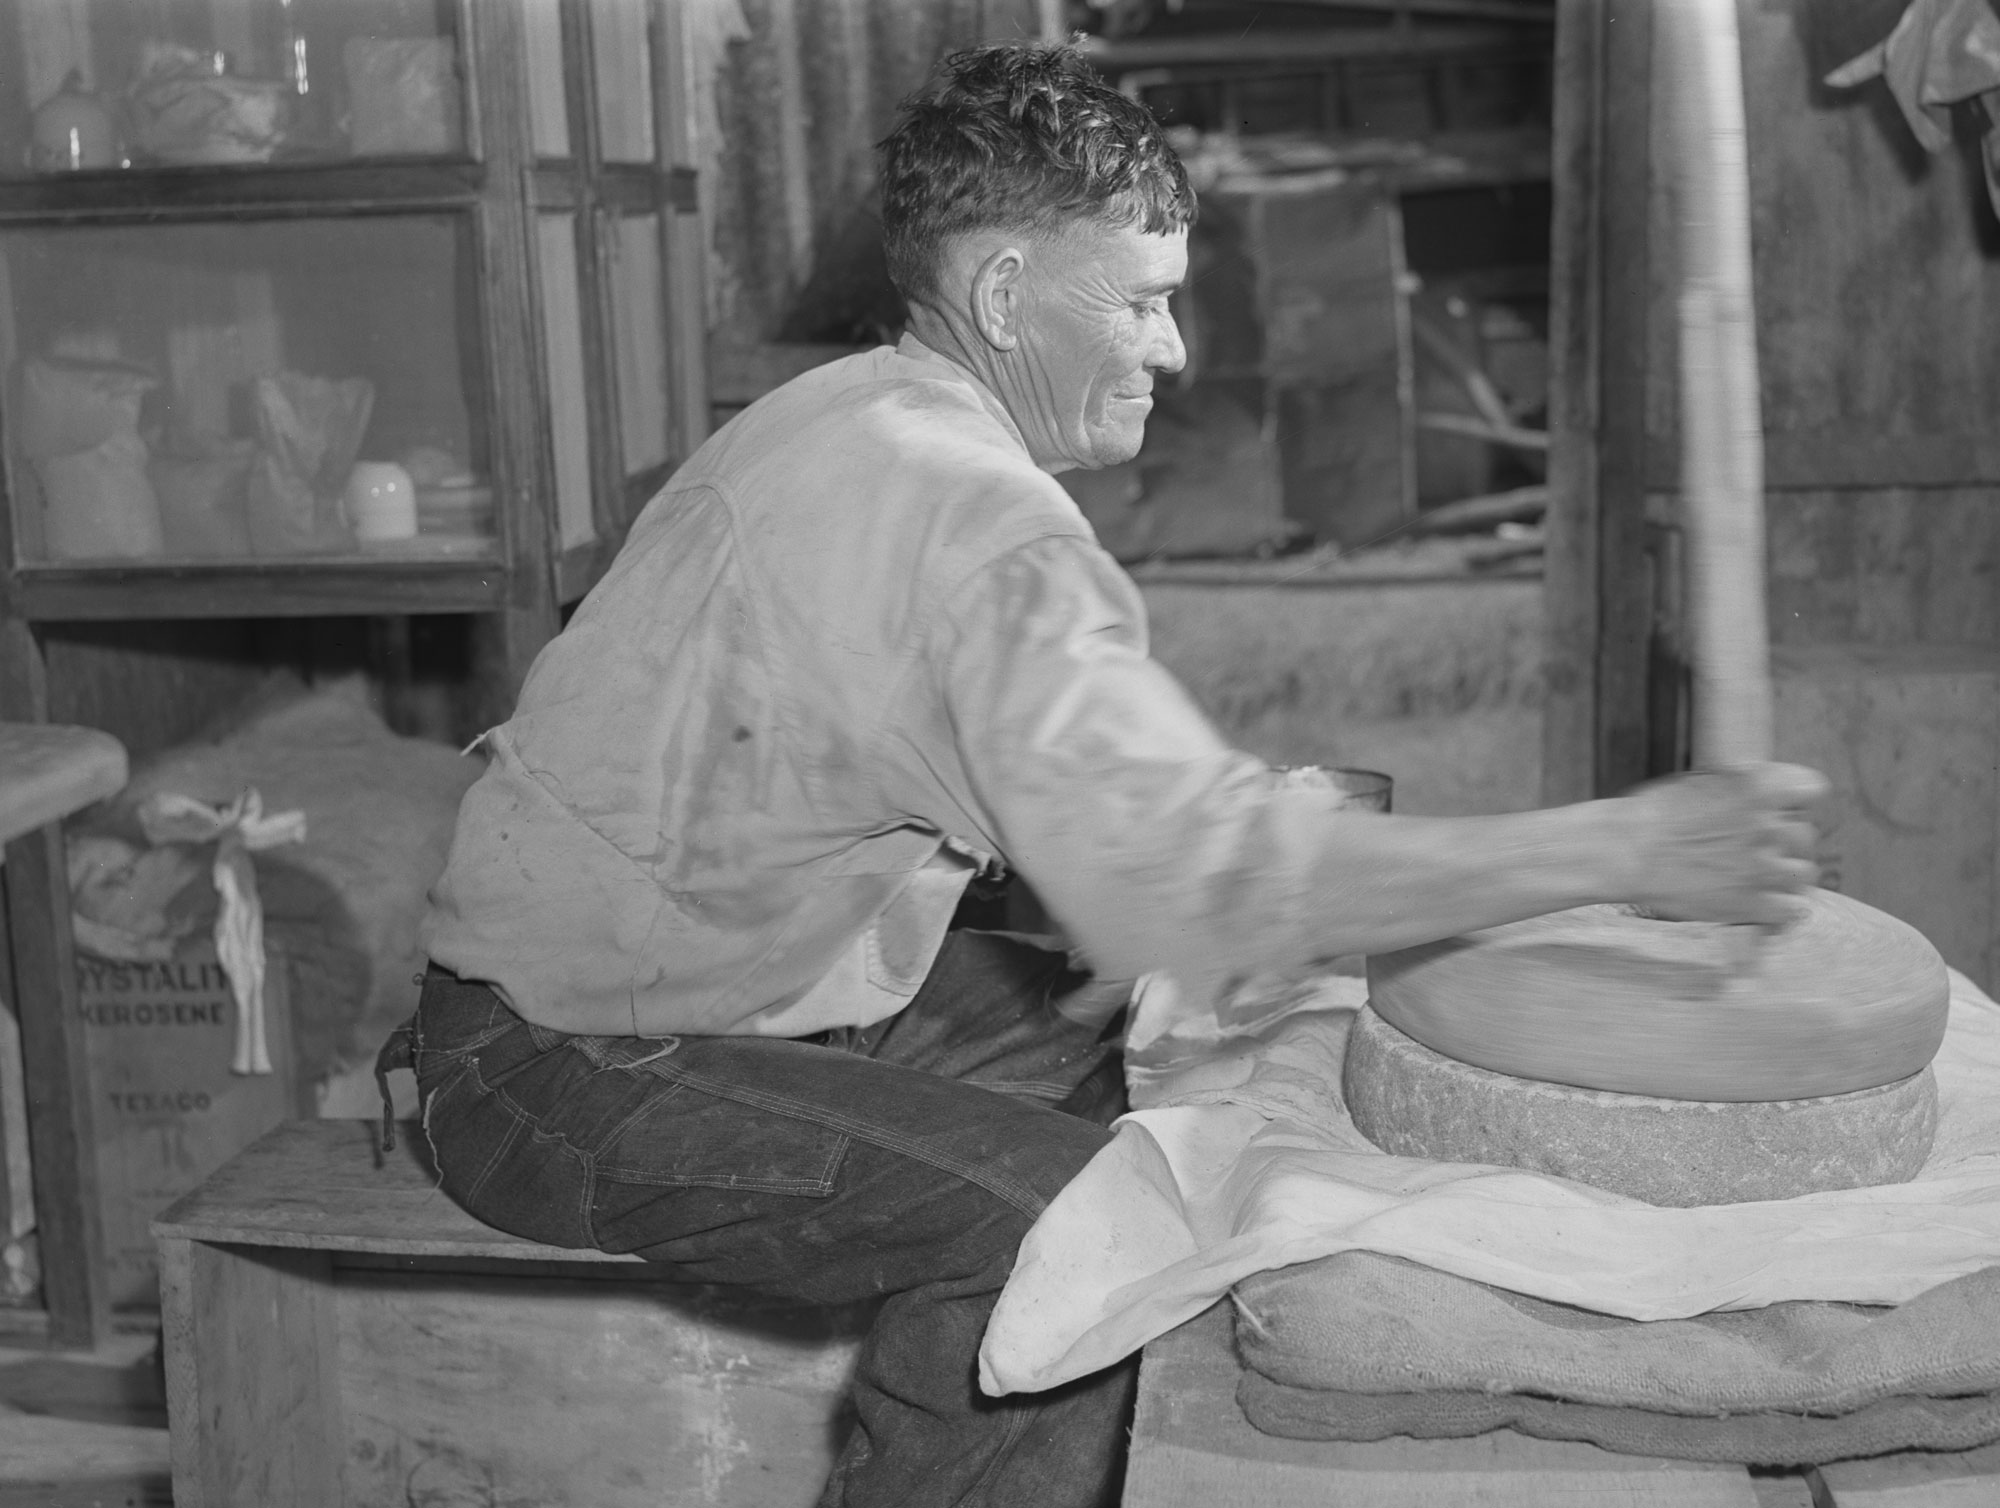 A photograph of a man using grinding stones on St. Croix Island in 1941. The man is sitting on a wooden box or stool, in front of a wood-plank table. He is wearing a long-sleeved shirt and what appear to be jeans. On the table are two large circular stones, one stacked on top of the other. The man is using a wooden pole placed in a depression near the edge of the upper stone to spin in on top of the lower stone, grinding maize grains between them.